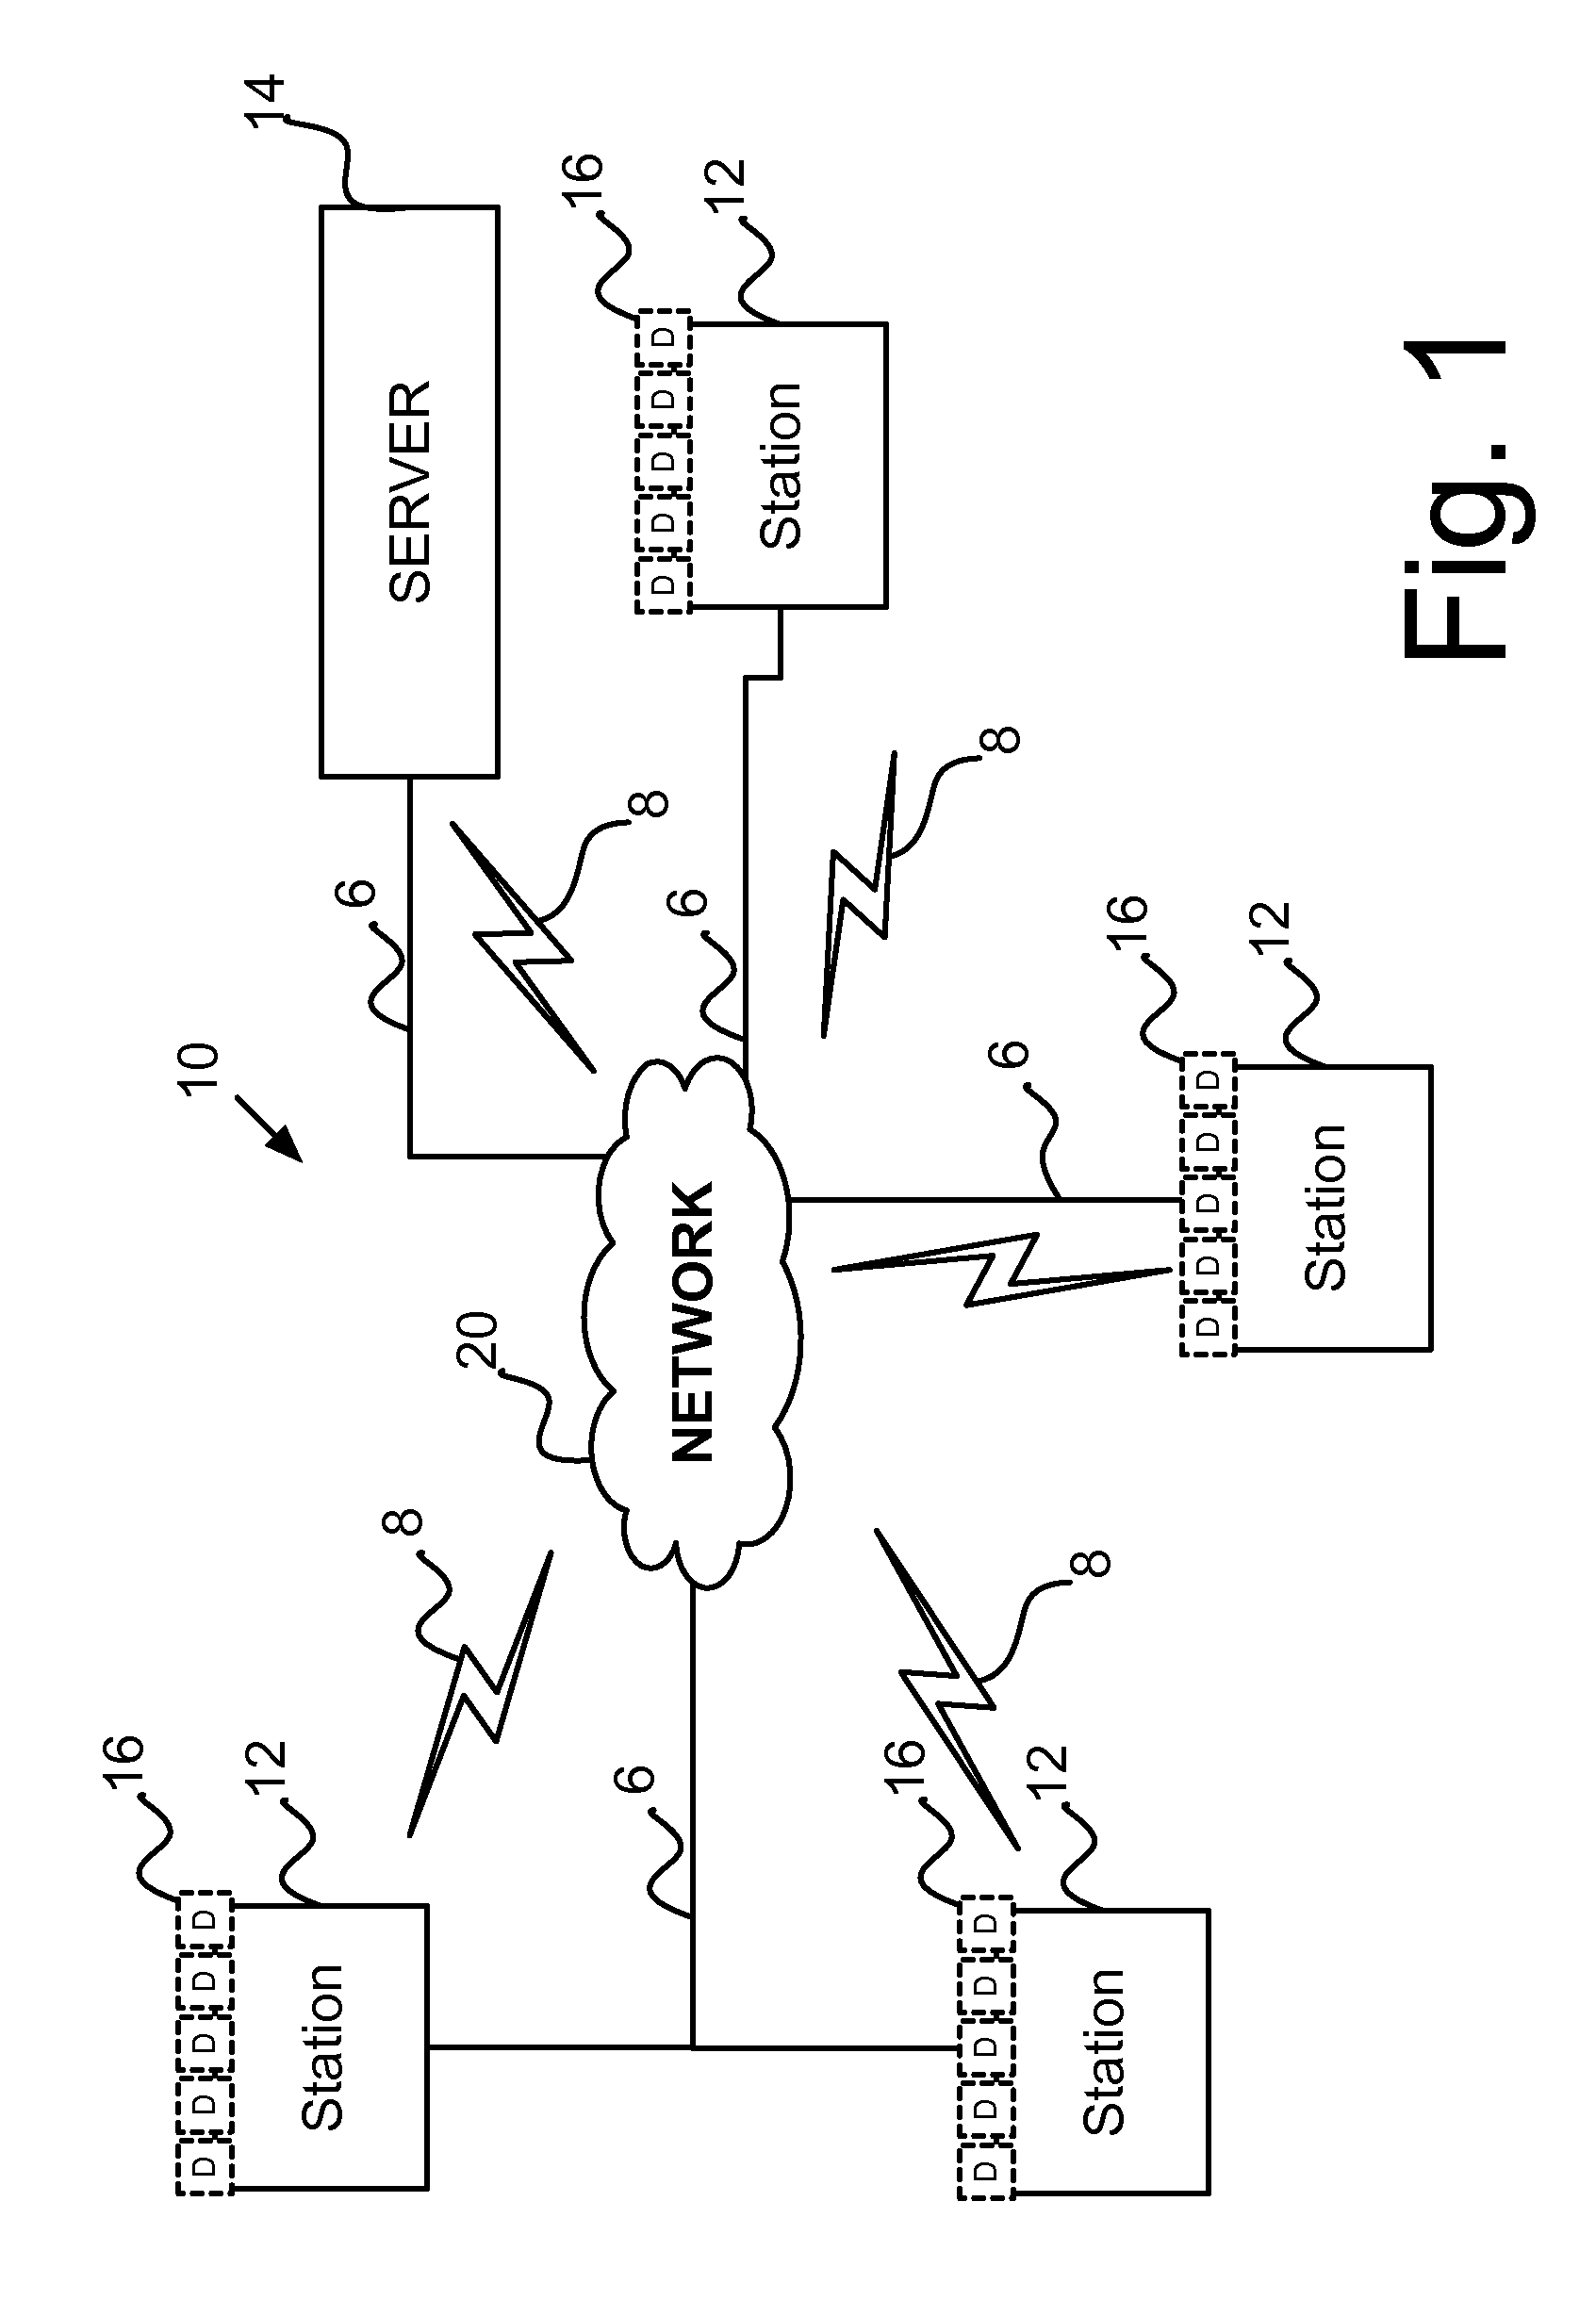 Method for communicating and repartitioning vehicles